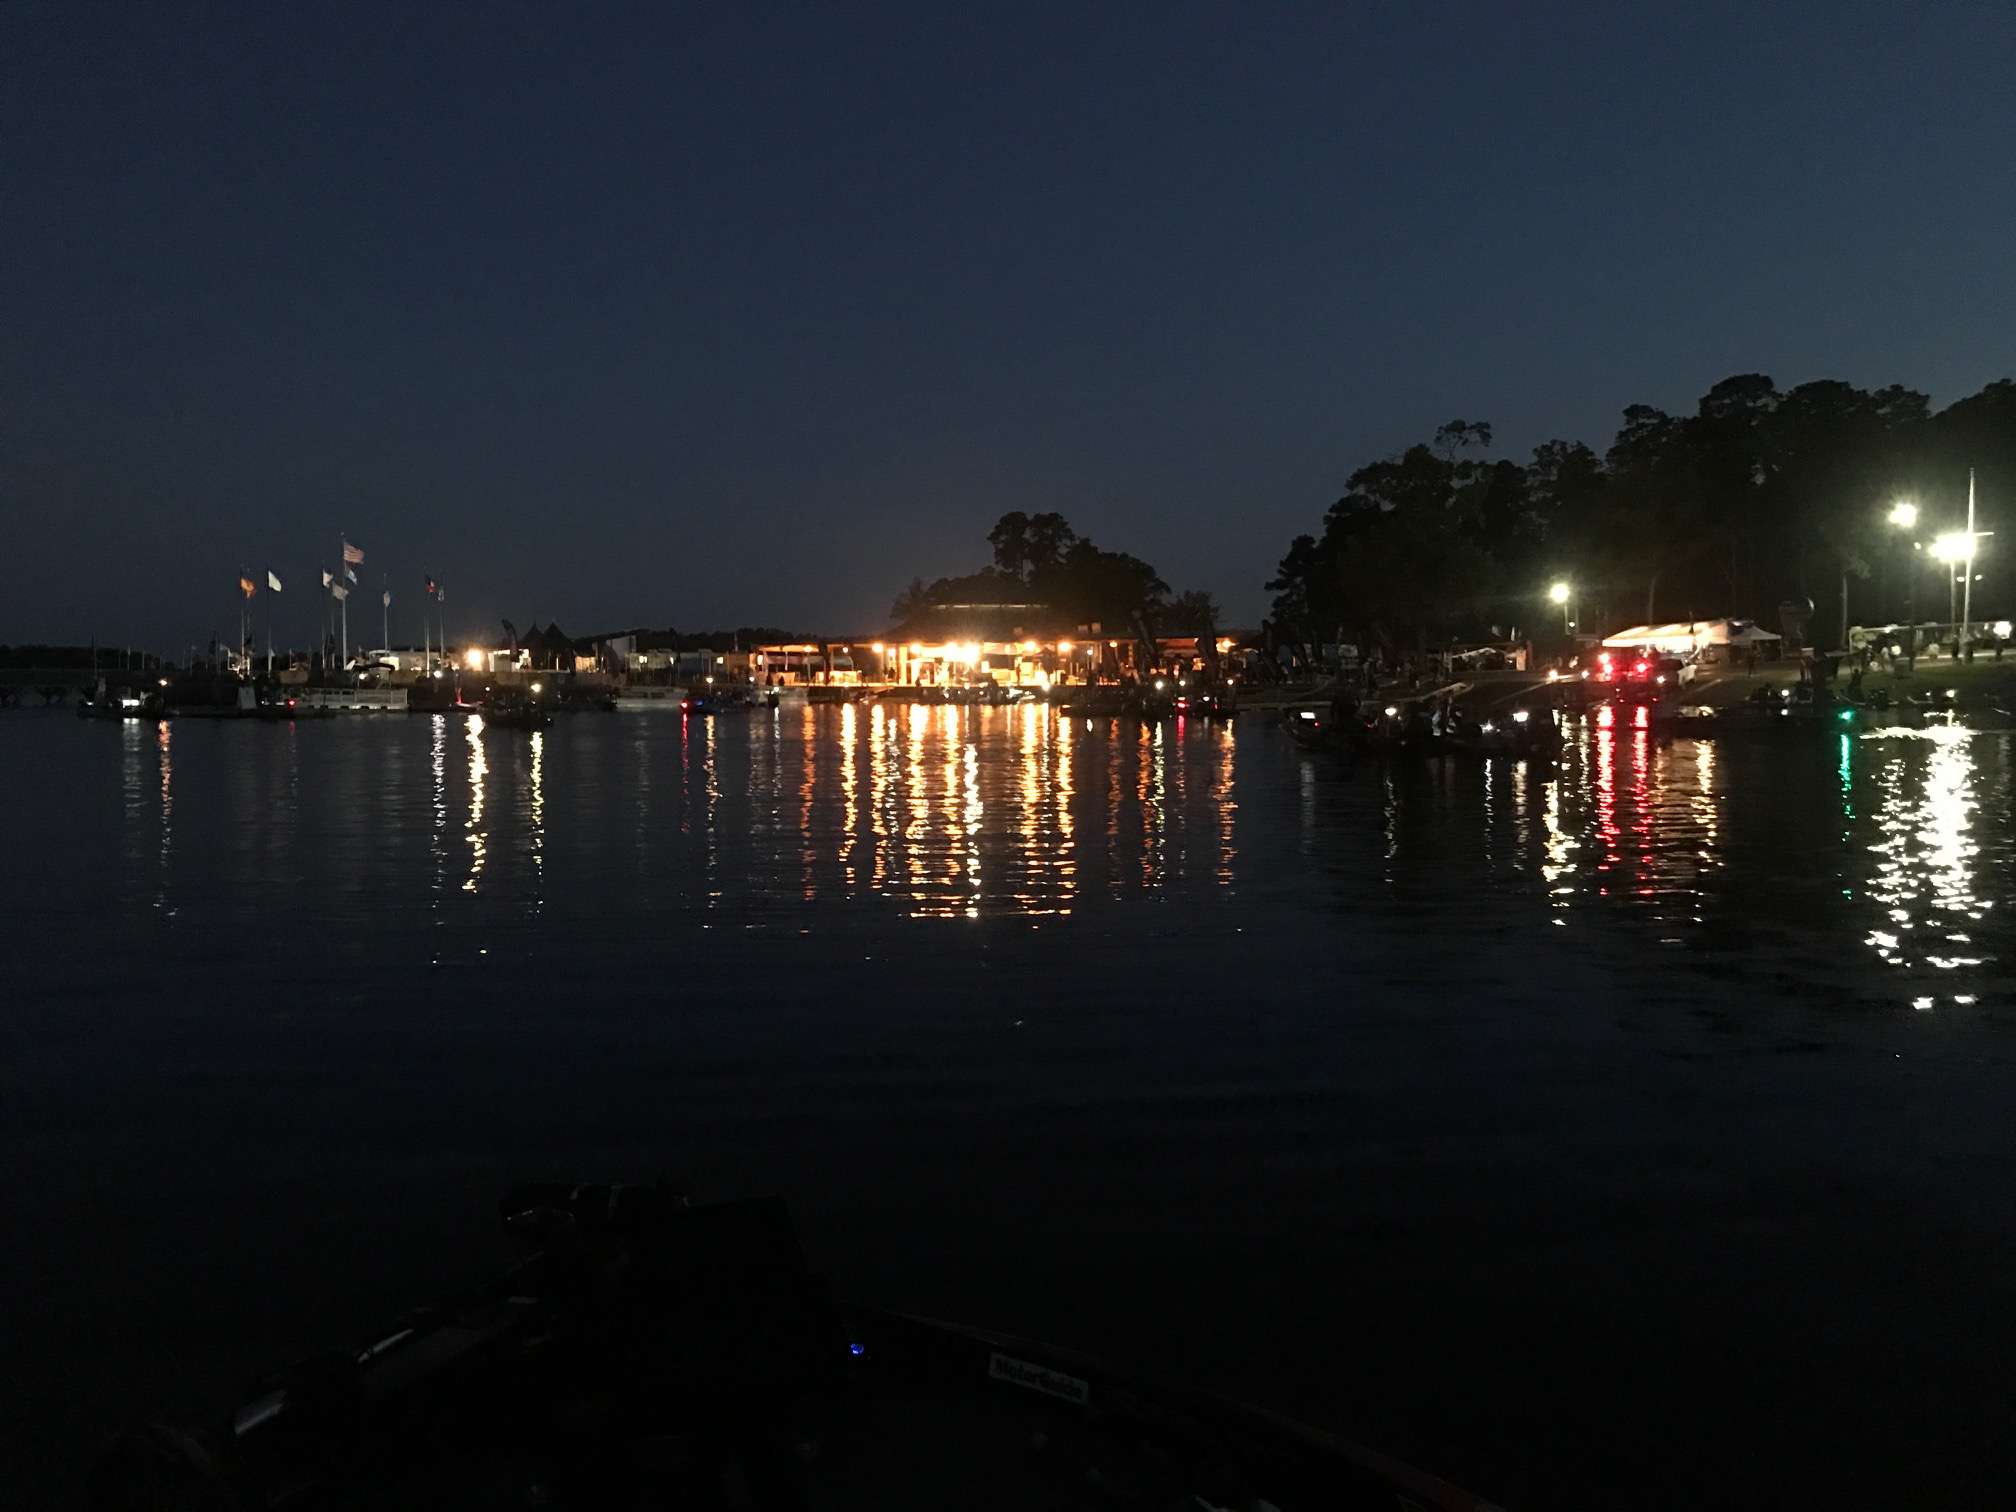 15 minutes to takeoff...slightly warmer today with slight breeze blowing the flags.  Everything is moving much quieter this morning.


<br><br>
<i>Looking for more on-the-water action from the marshals?  Check out the <b><a href=https://www.bassmaster.com/slideshow/marshals-day-1-toledo-bend target=